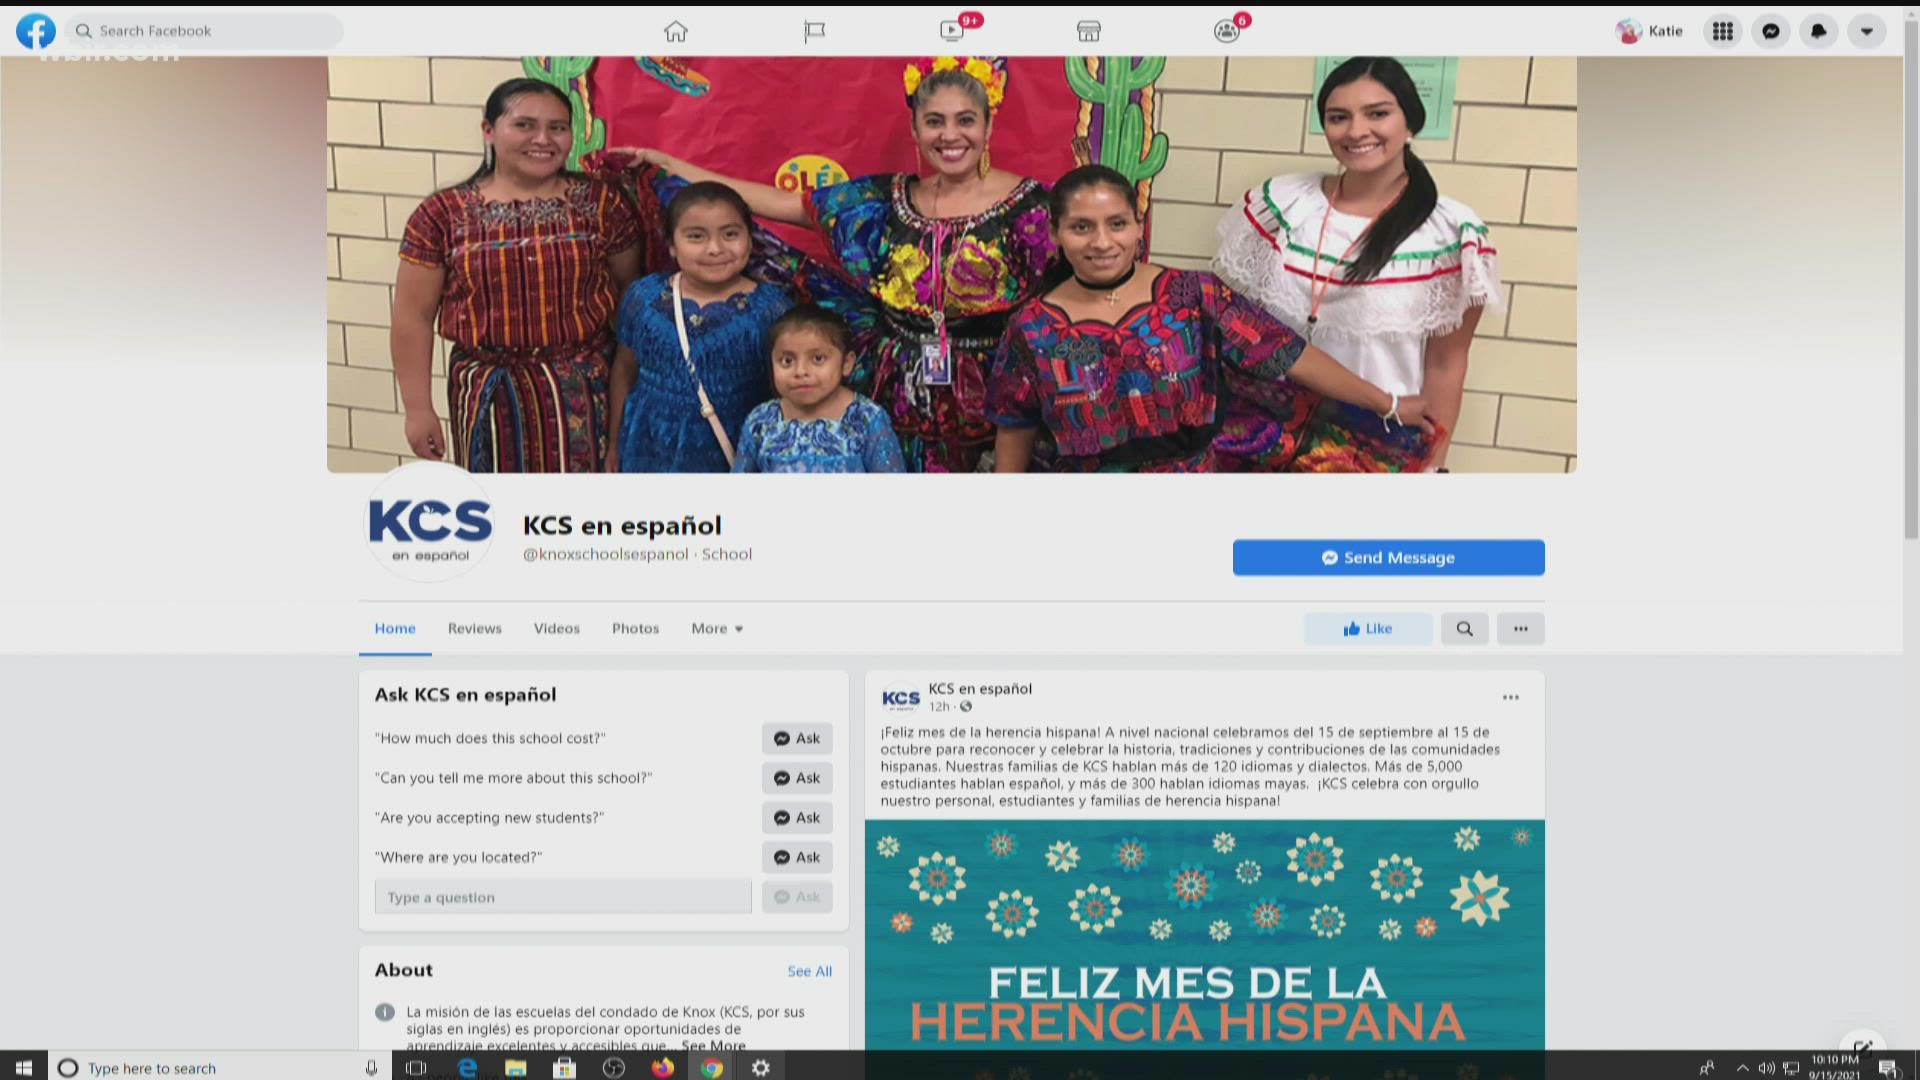 The "KCS en español" Facebook page will include news, announcements and updates for Spanish-speaking families in Knox County.